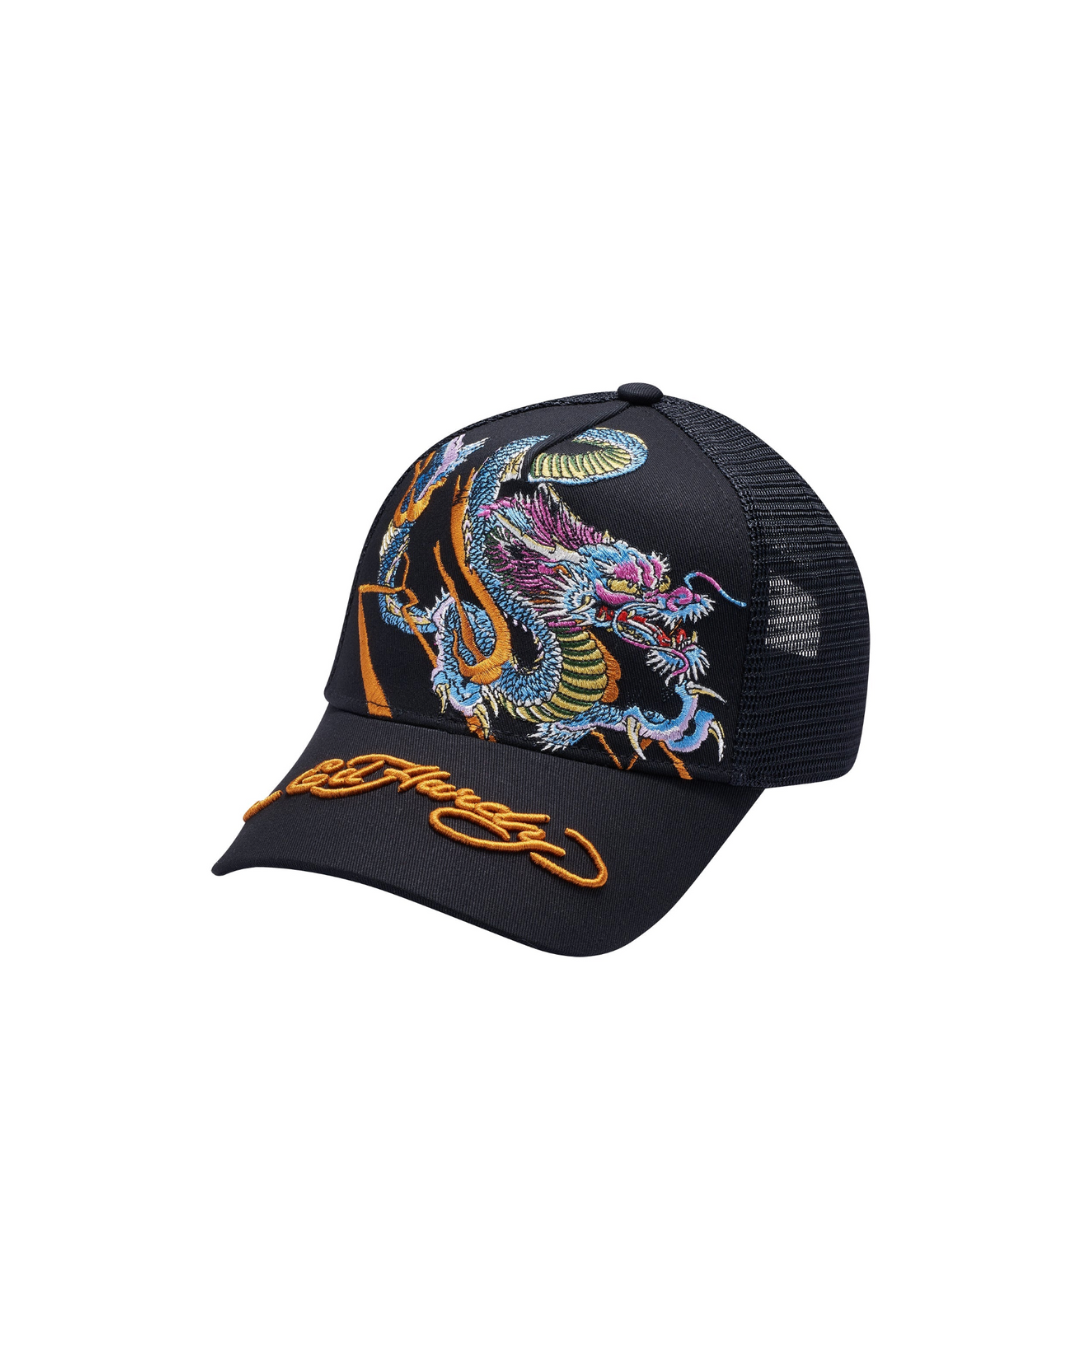 Men's Caps – Ed Hardy Official